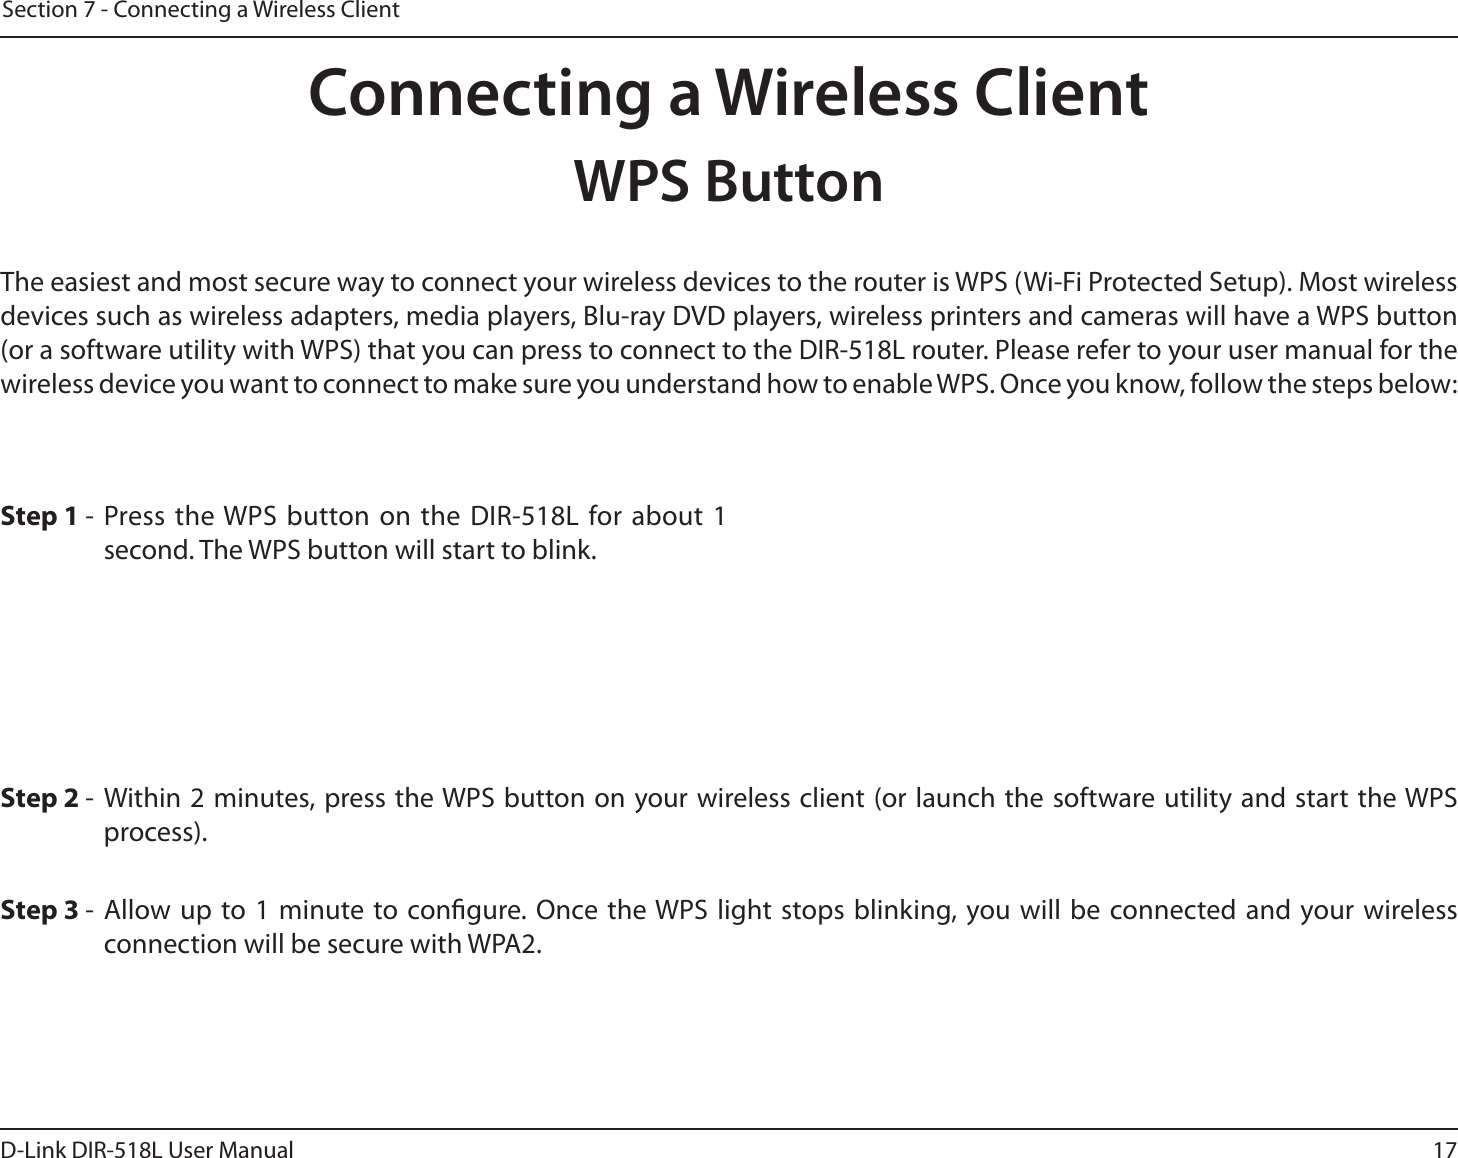 17D-Link DIR-518L User ManualSection 7 - Connecting a Wireless ClientConnecting a Wireless ClientWPS ButtonStep 2 - Within 2 minutes, press the WPS button on your wireless client (or launch the software utility and start the WPS process).The easiest and most secure way to connect your wireless devices to the router is WPS (Wi-Fi Protected Setup). Most wireless devices such as wireless adapters, media players, Blu-ray DVD players, wireless printers and cameras will have a WPS button (or a software utility with WPS) that you can press to connect to the DIR-518L router. Please refer to your user manual for the wireless device you want to connect to make sure you understand how to enable WPS. Once you know, follow the steps below:Step 1 - Press the WPS button on the DIR-518L for about 1 second. The WPS button will start to blink.Step 3 - Allow up to 1 minute to congure. Once the WPS light stops blinking, you will be connected and your wireless connection will be secure with WPA2.